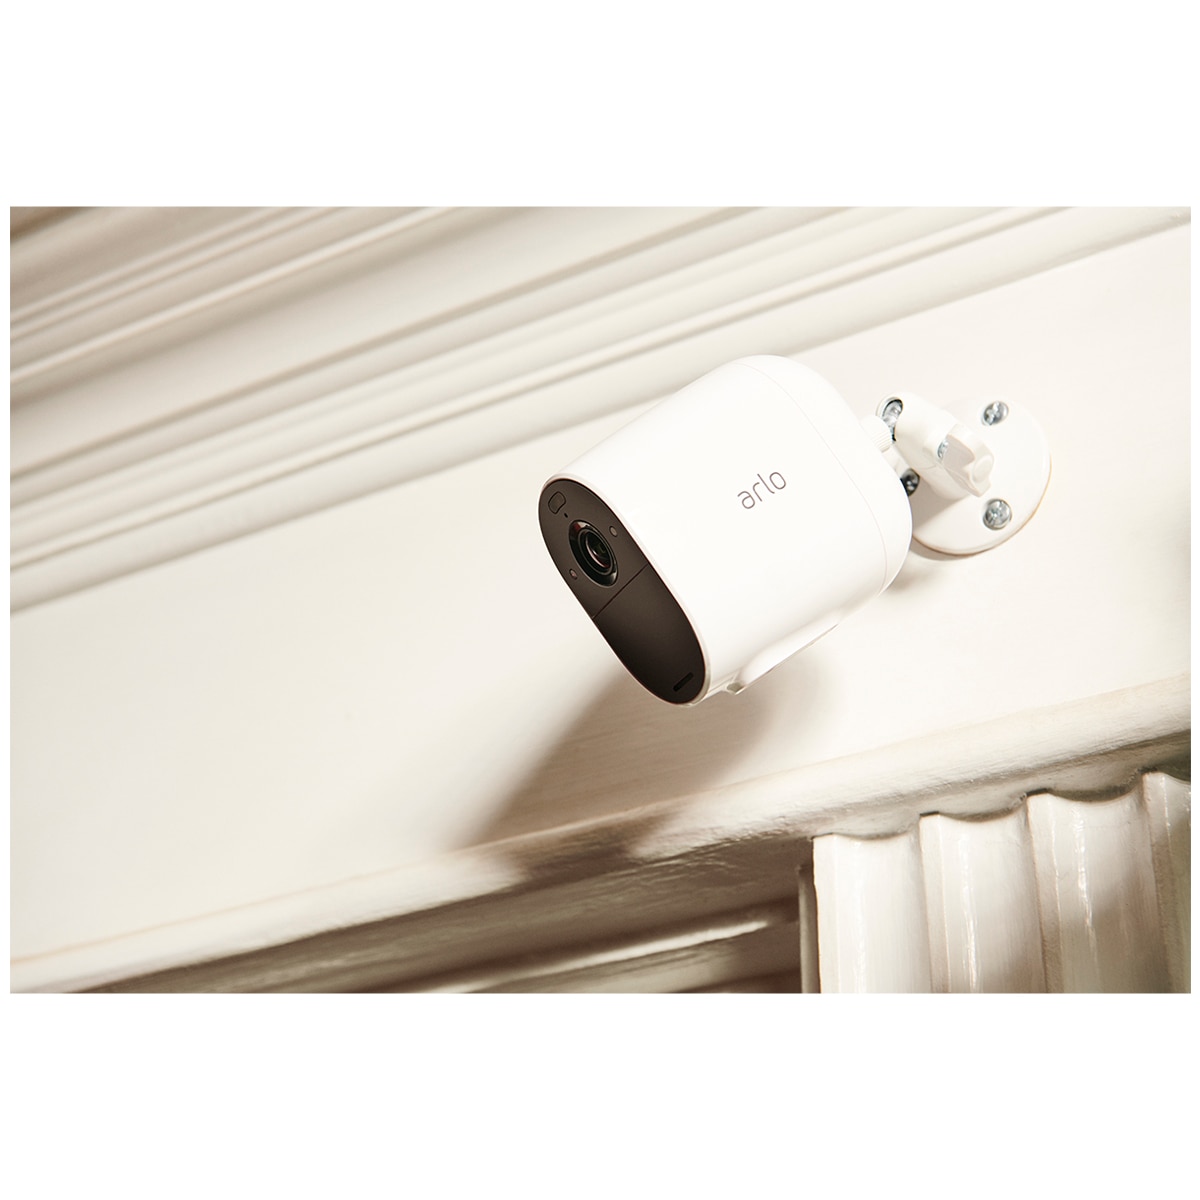 Arlo Ess Security Camera with Door Bell and Solar Panel VMC2030-AVDSPBNDL